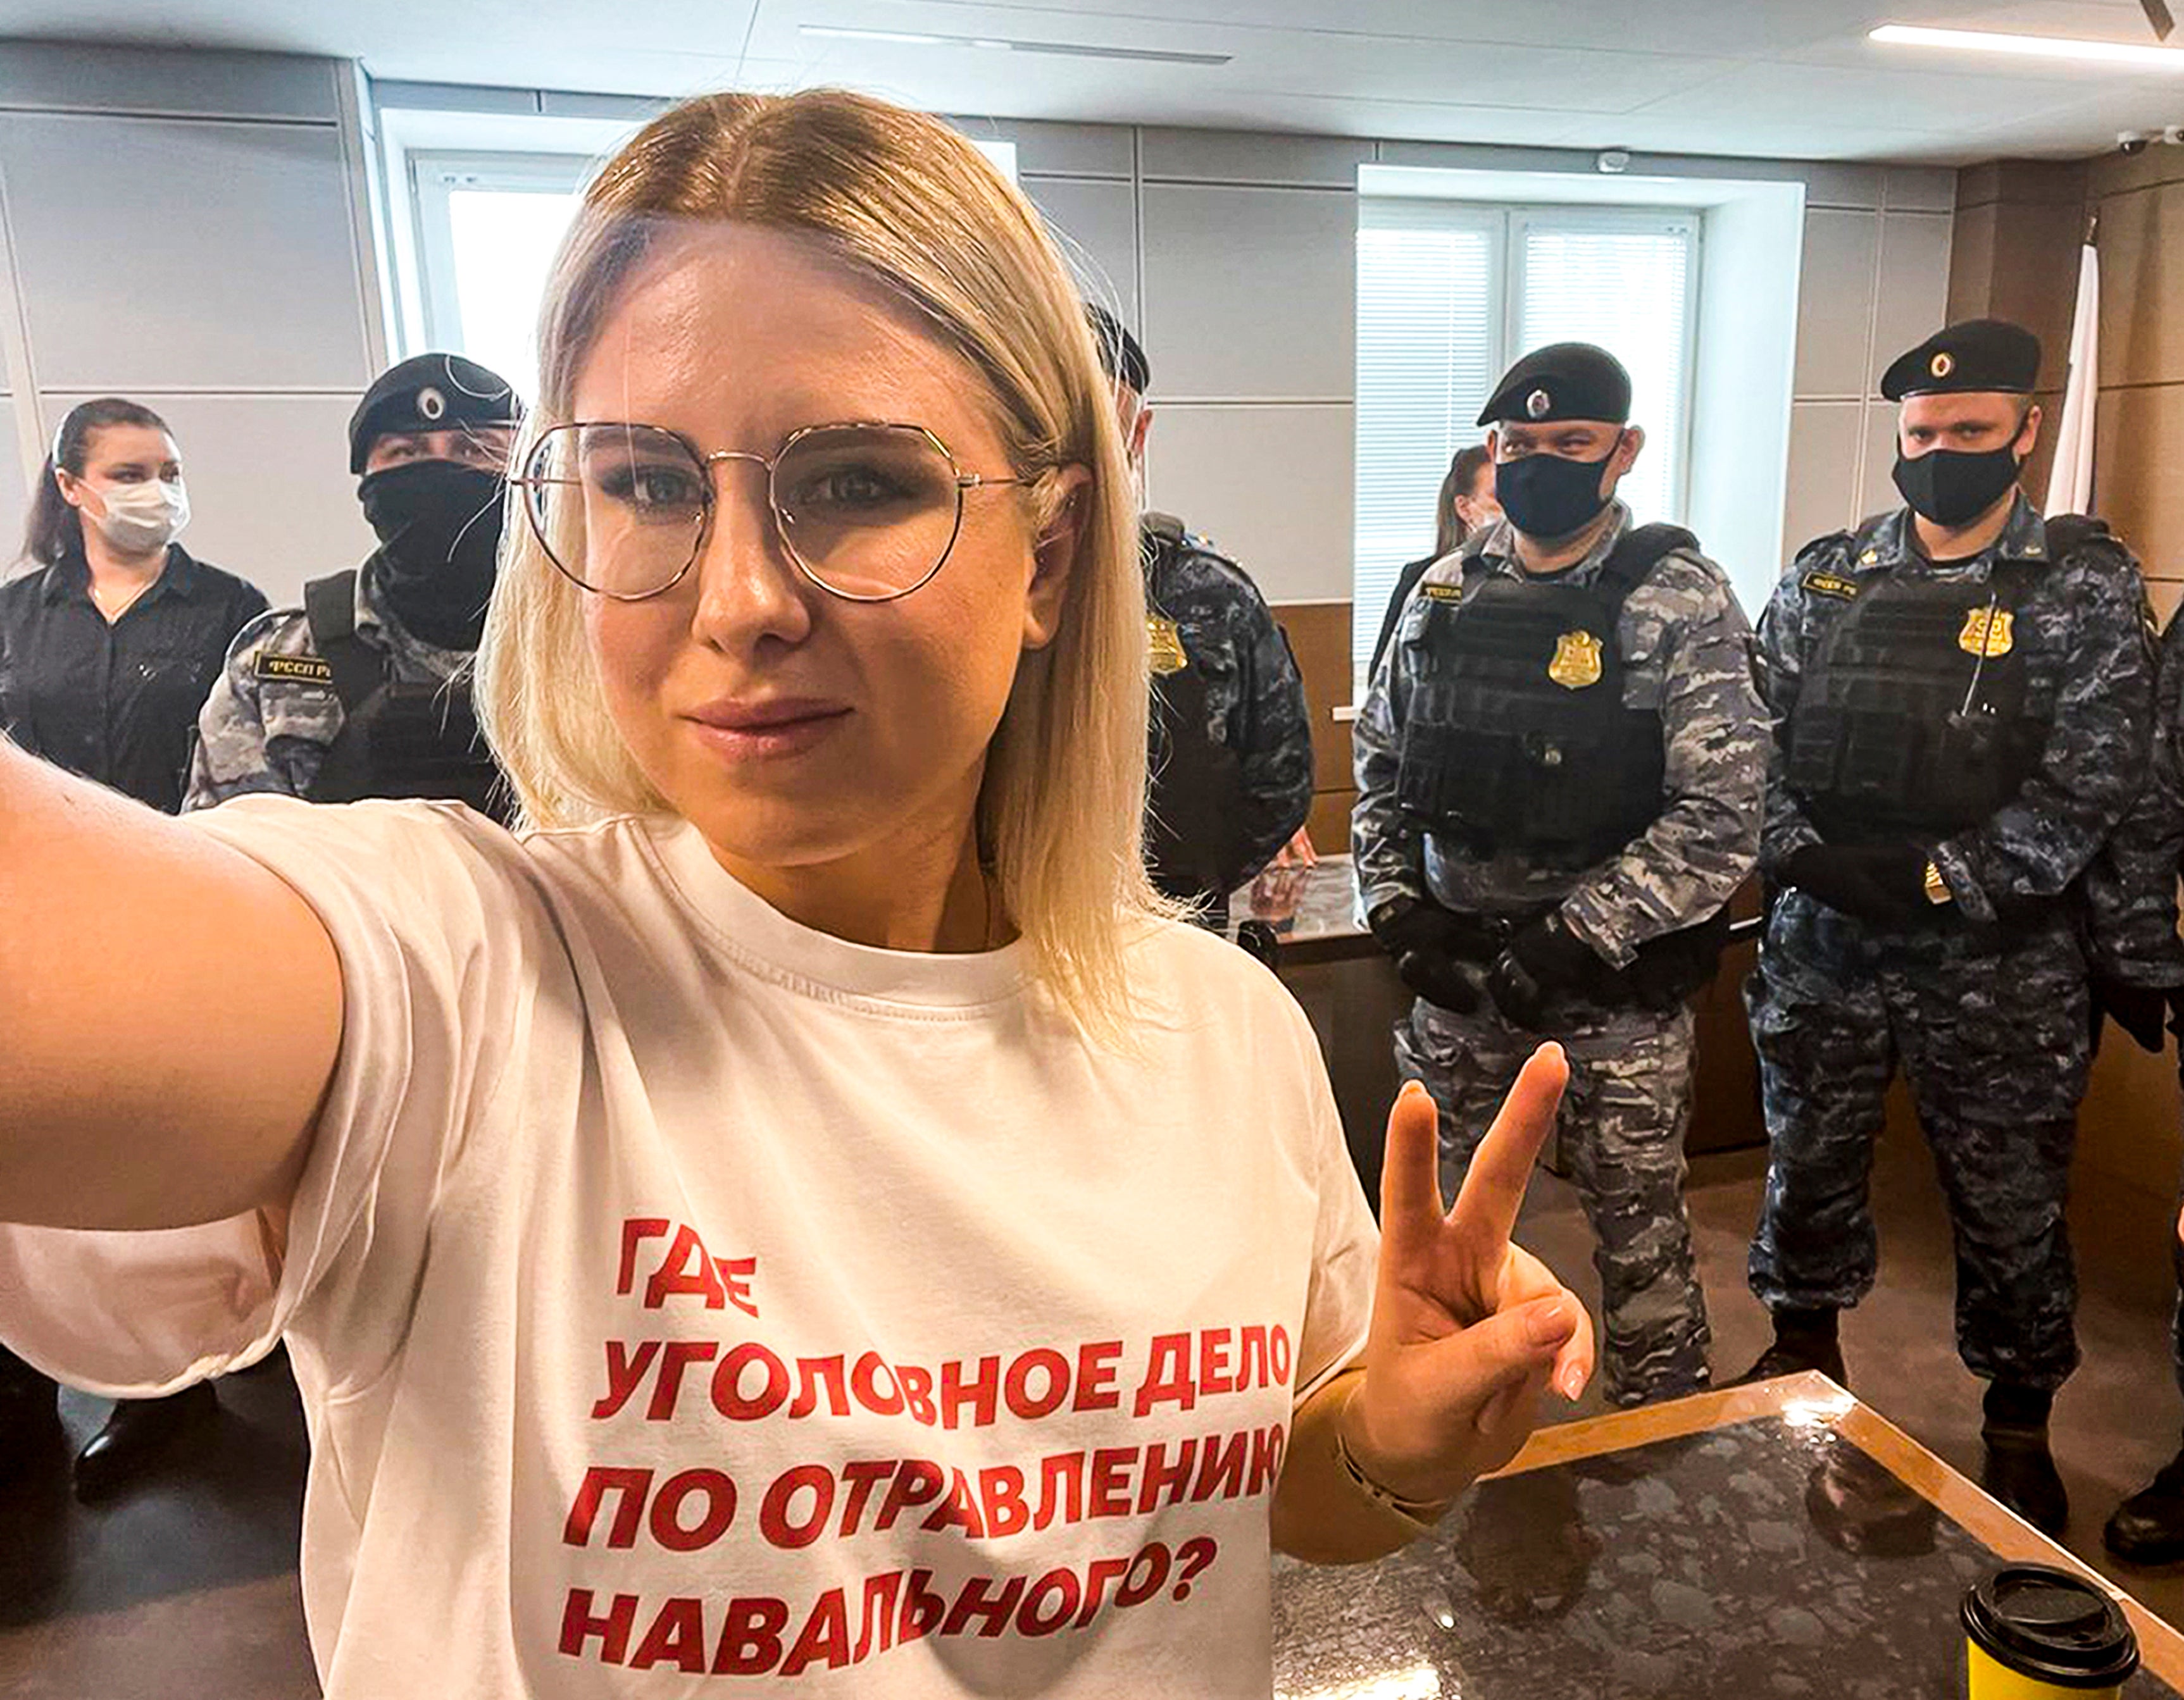 Russian opposition activist Lyubov Sobol was arrested in Moscow on Wednesday